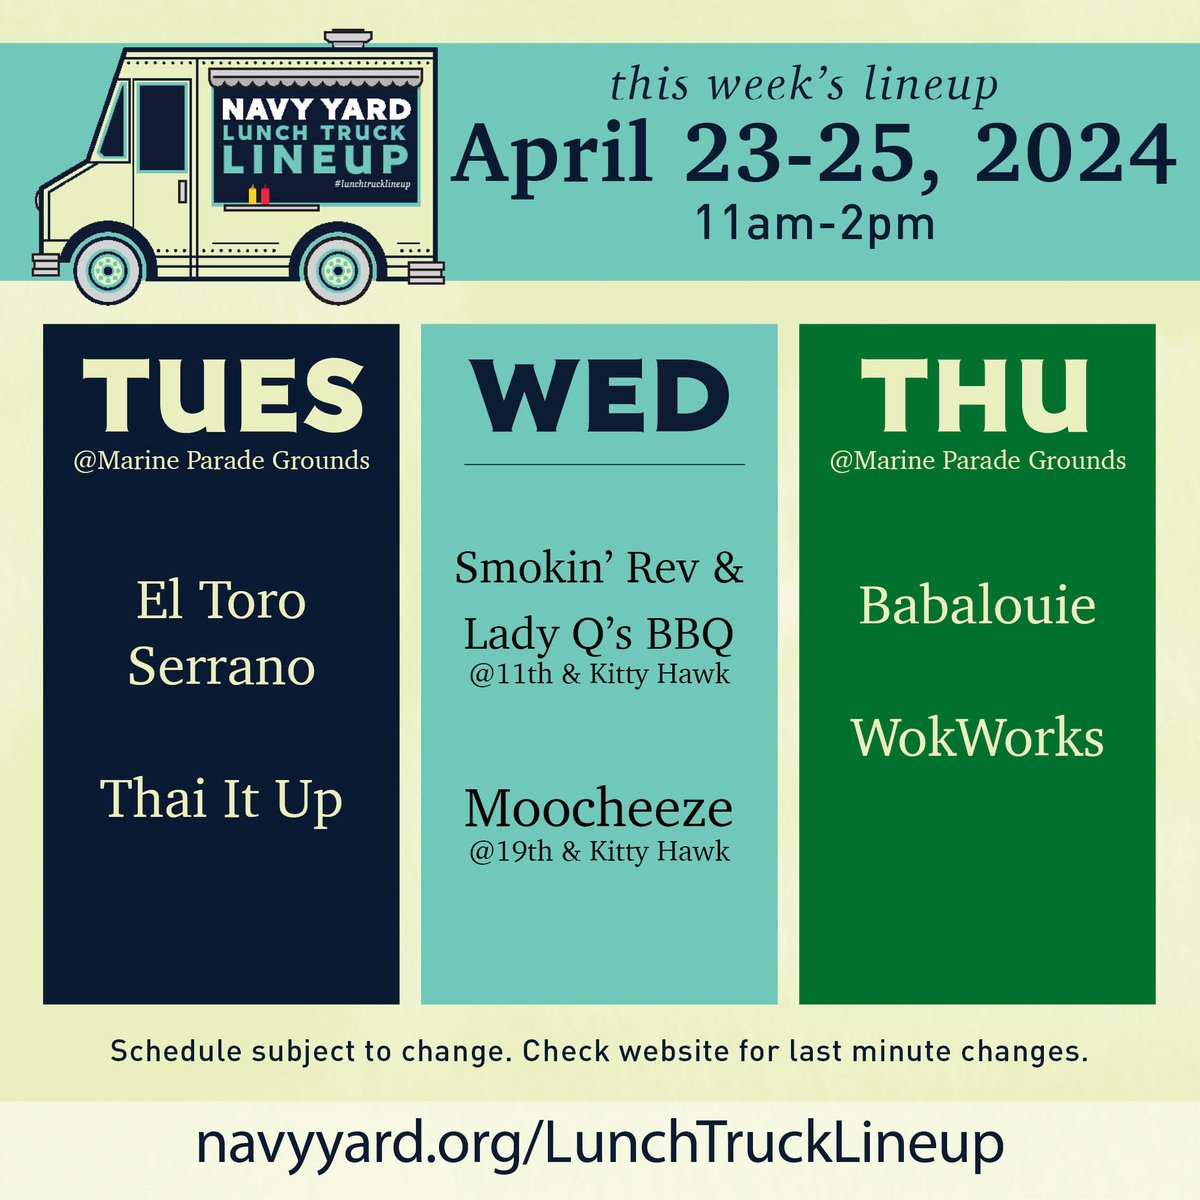 We're serving up some delicious options this week, make sure you come check them out. Tues - El Toro Serrano and Thai It Up Wed - Smokin Rev and Lady Q's BBQ and Moocheeze Thurs - Babalouie BBQ and WokWorks #navyyardeats #discovertheyard #navyyardphilly #lunchtrucklineup